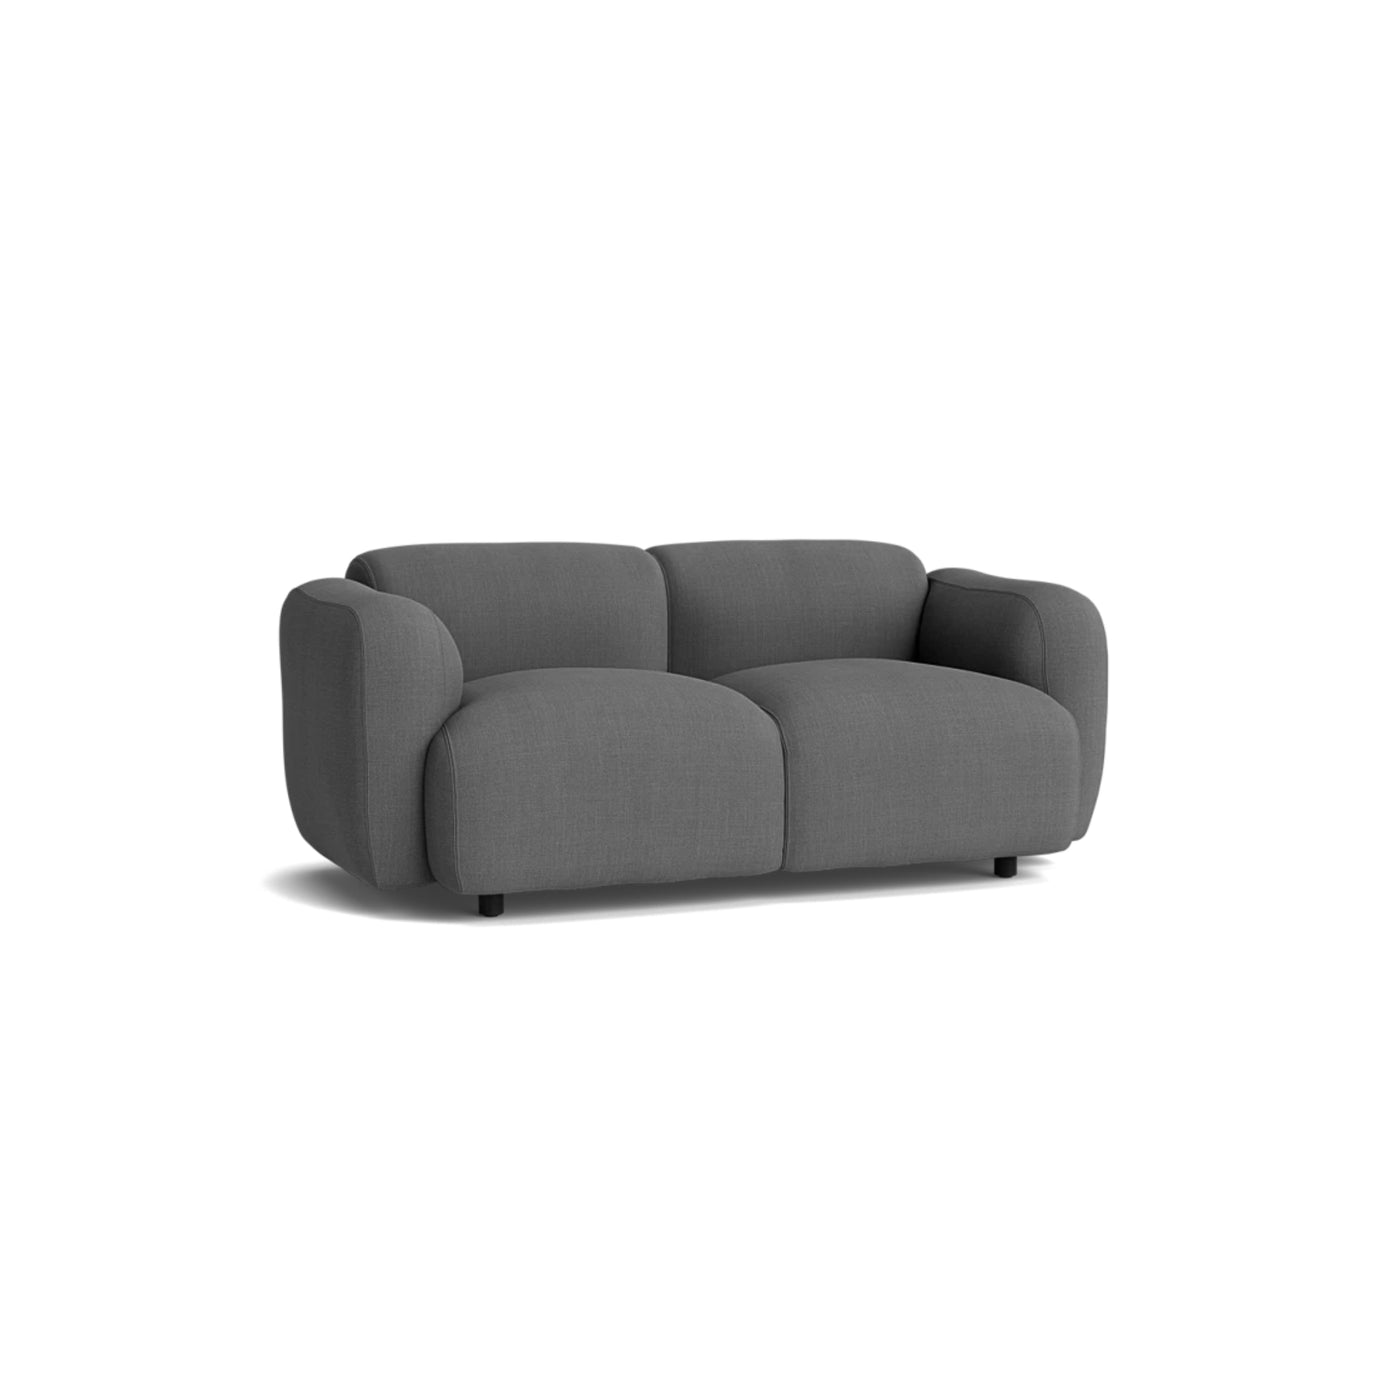 Normann Copenhagen Swell 2 Seater Sofa at someday designs. #colour_remix-163